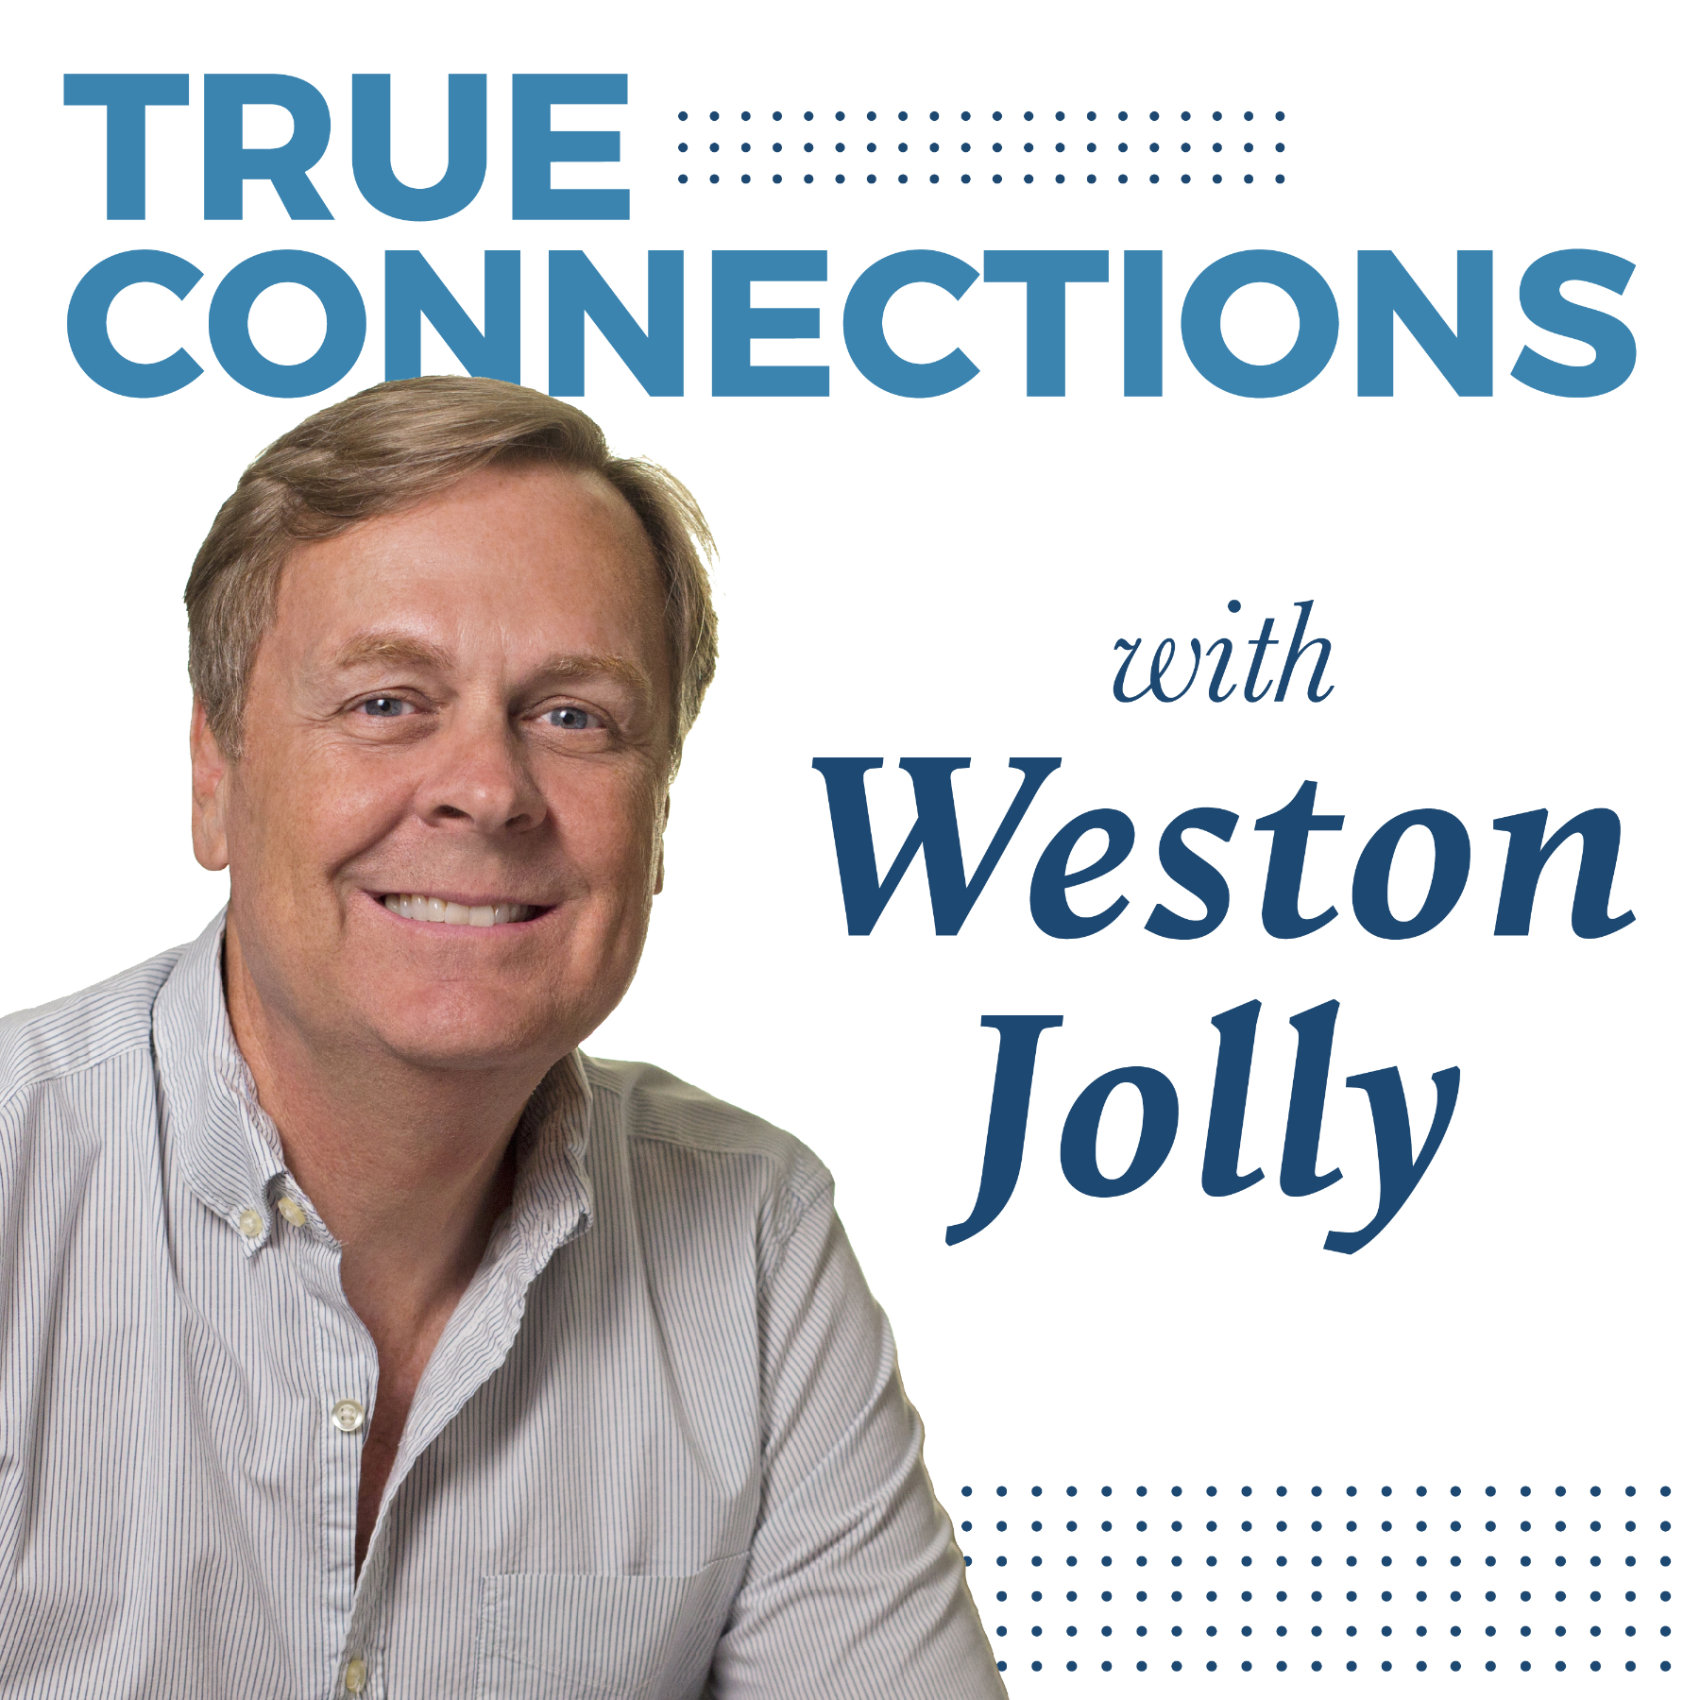 True Connections with Weston Jolly Podcast